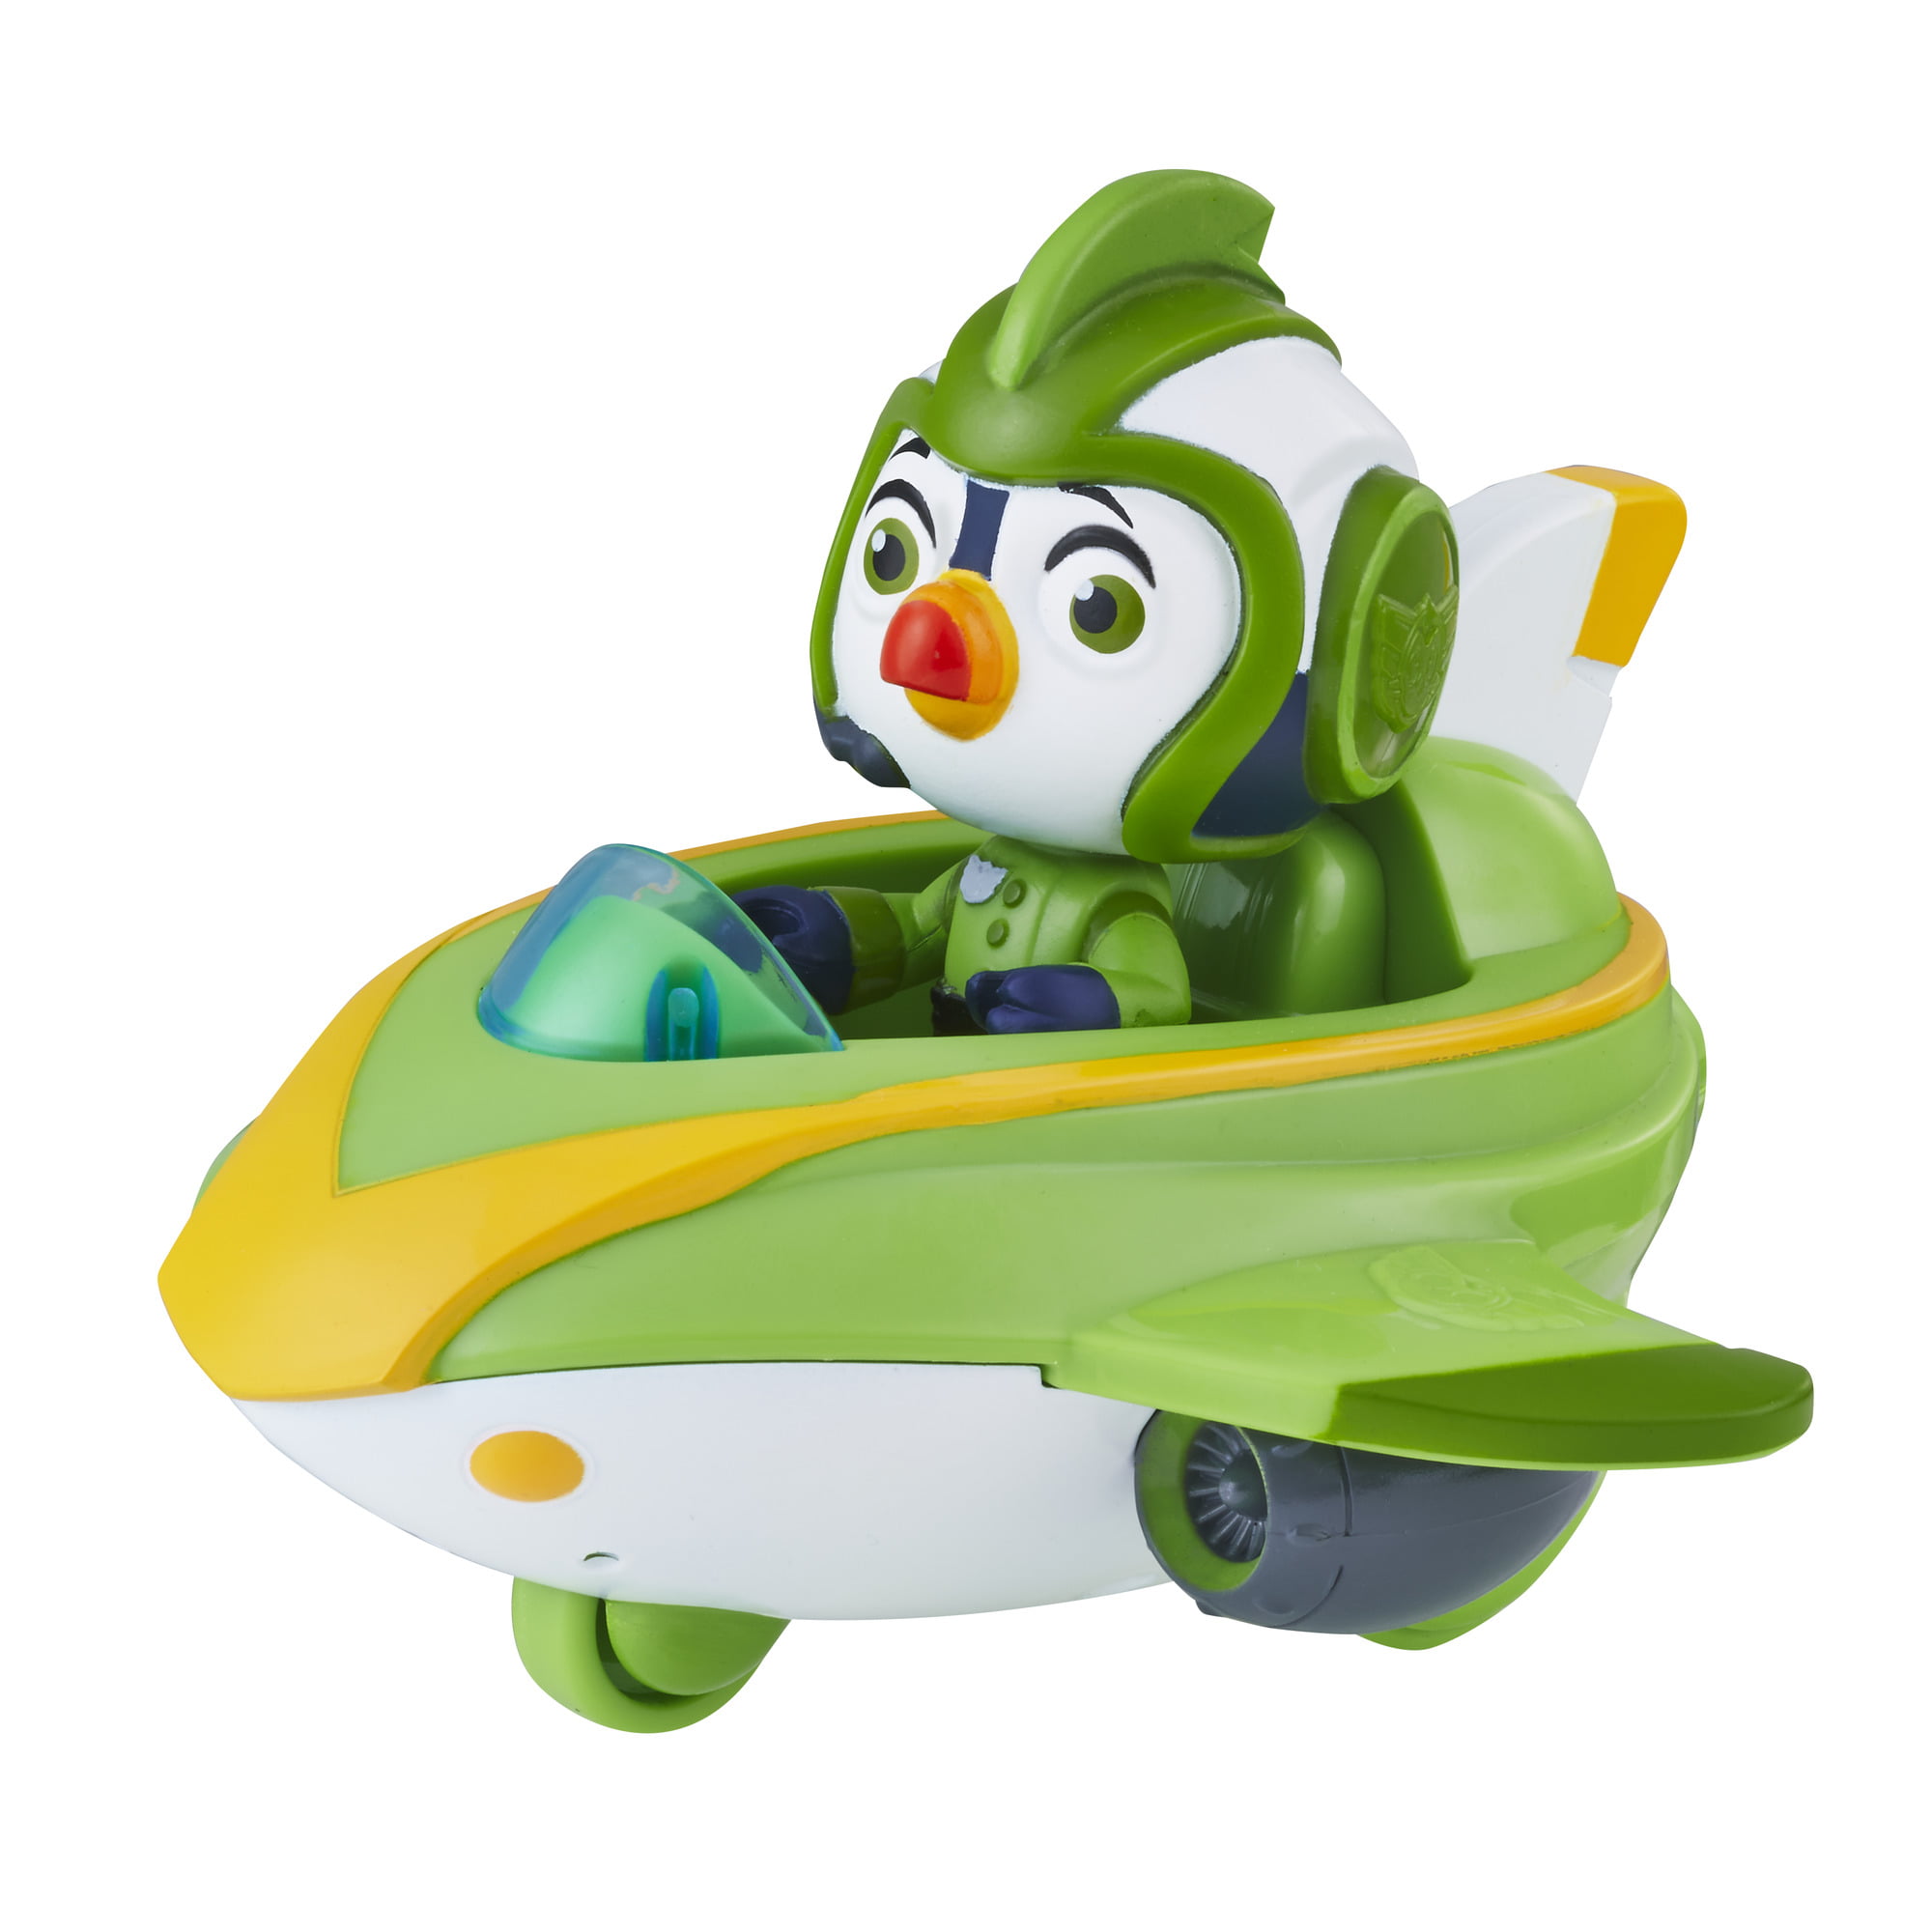 Details about   Nick Jr Top Wing Brody's Splash Wing Action Figure & Vehicle Racer Car Toy New 